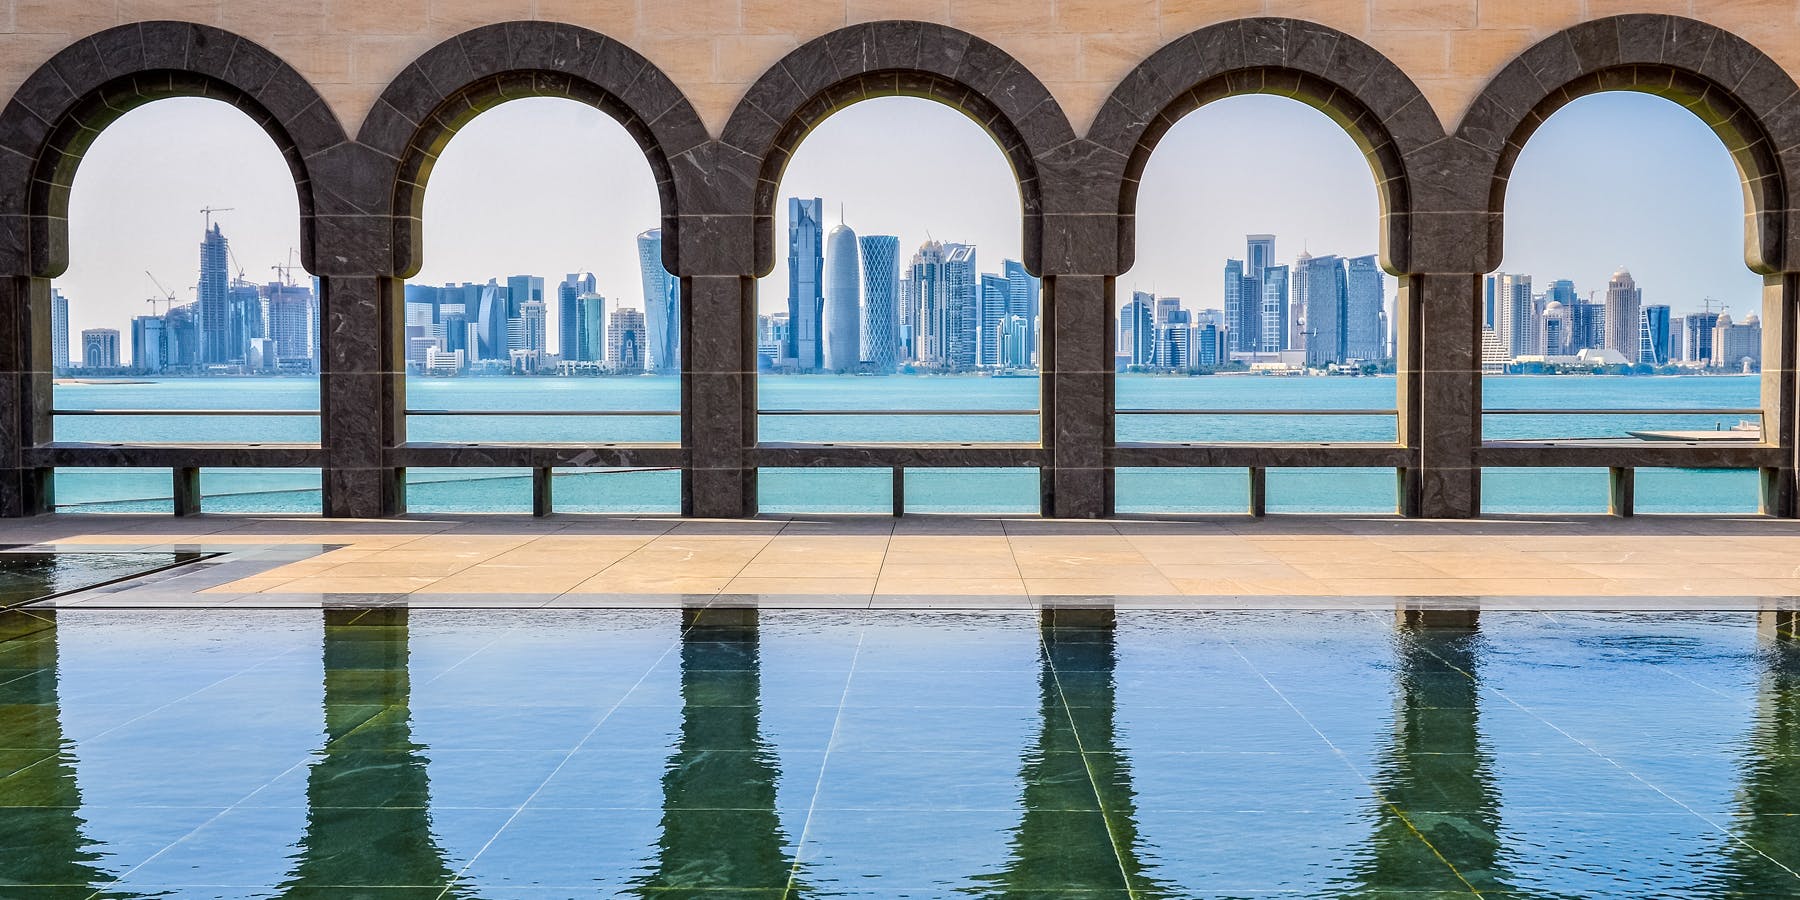 More about Qatar